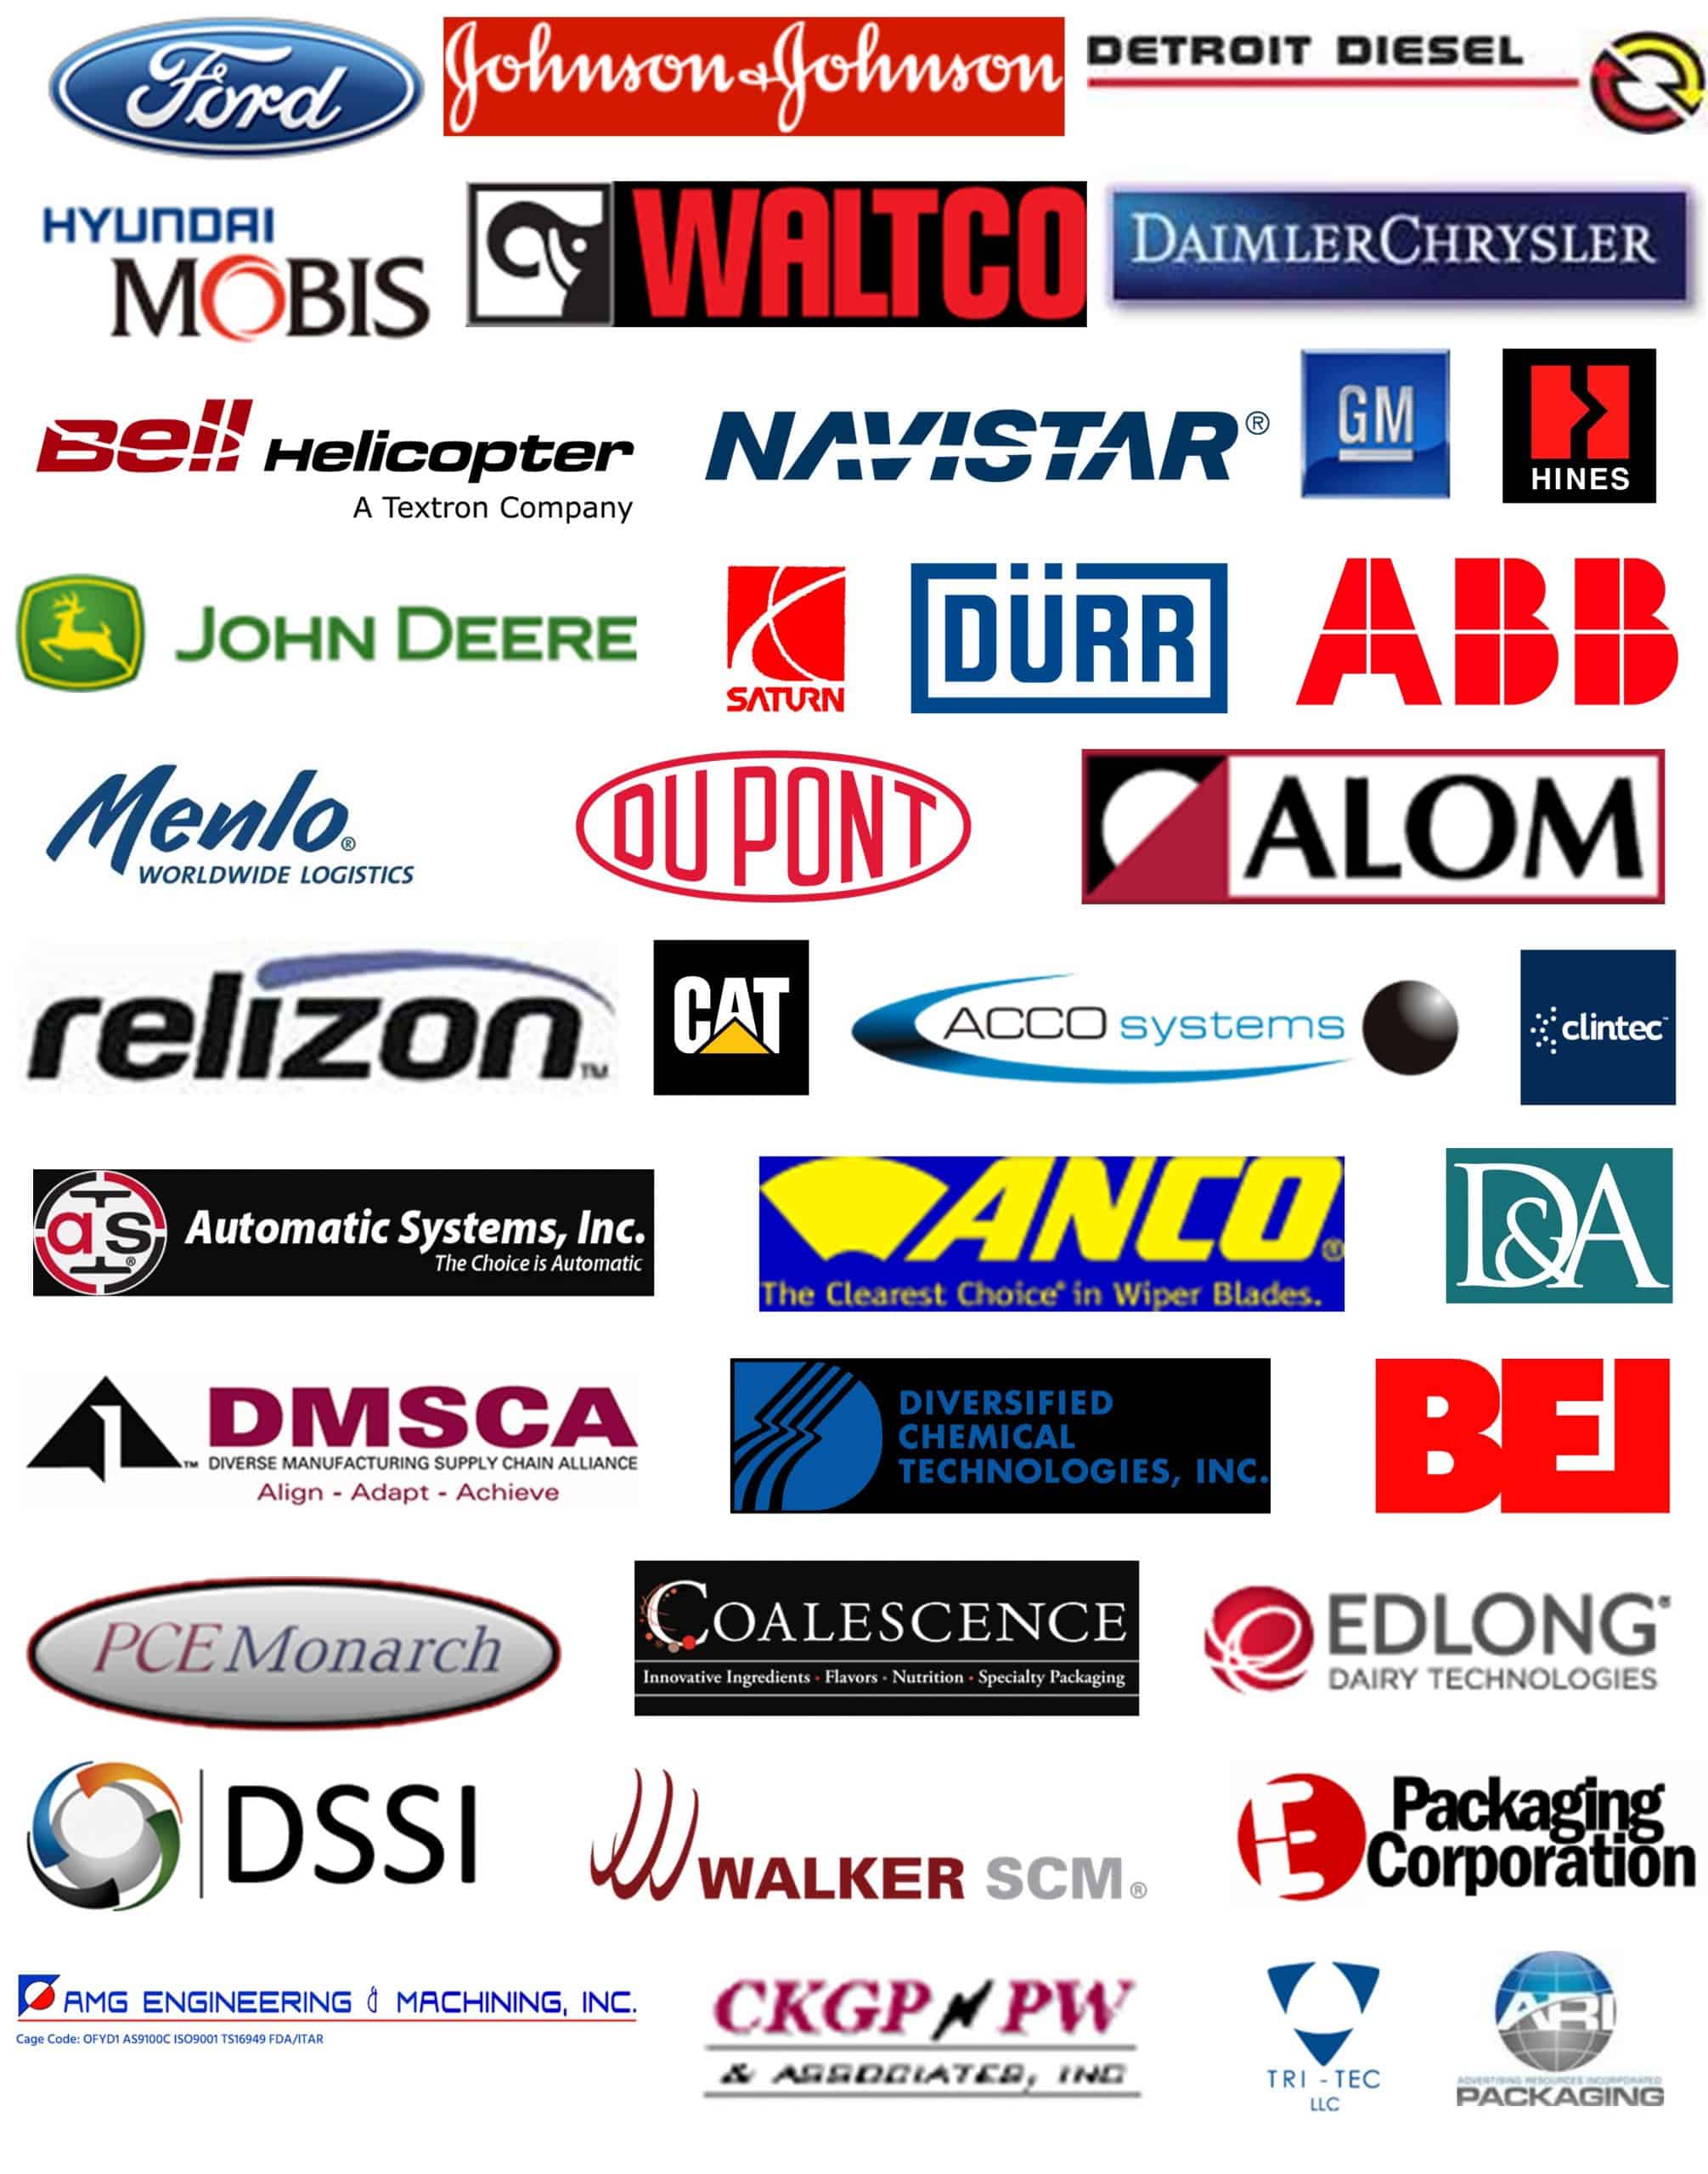 History of Success Logos Pic, serving a variety of industries, including automotive, outdoor power products, bicycle, industrial machinery and heavy equipment, helicopter, consumer goods, distribution/logistics, and general manufacturing/industrial products